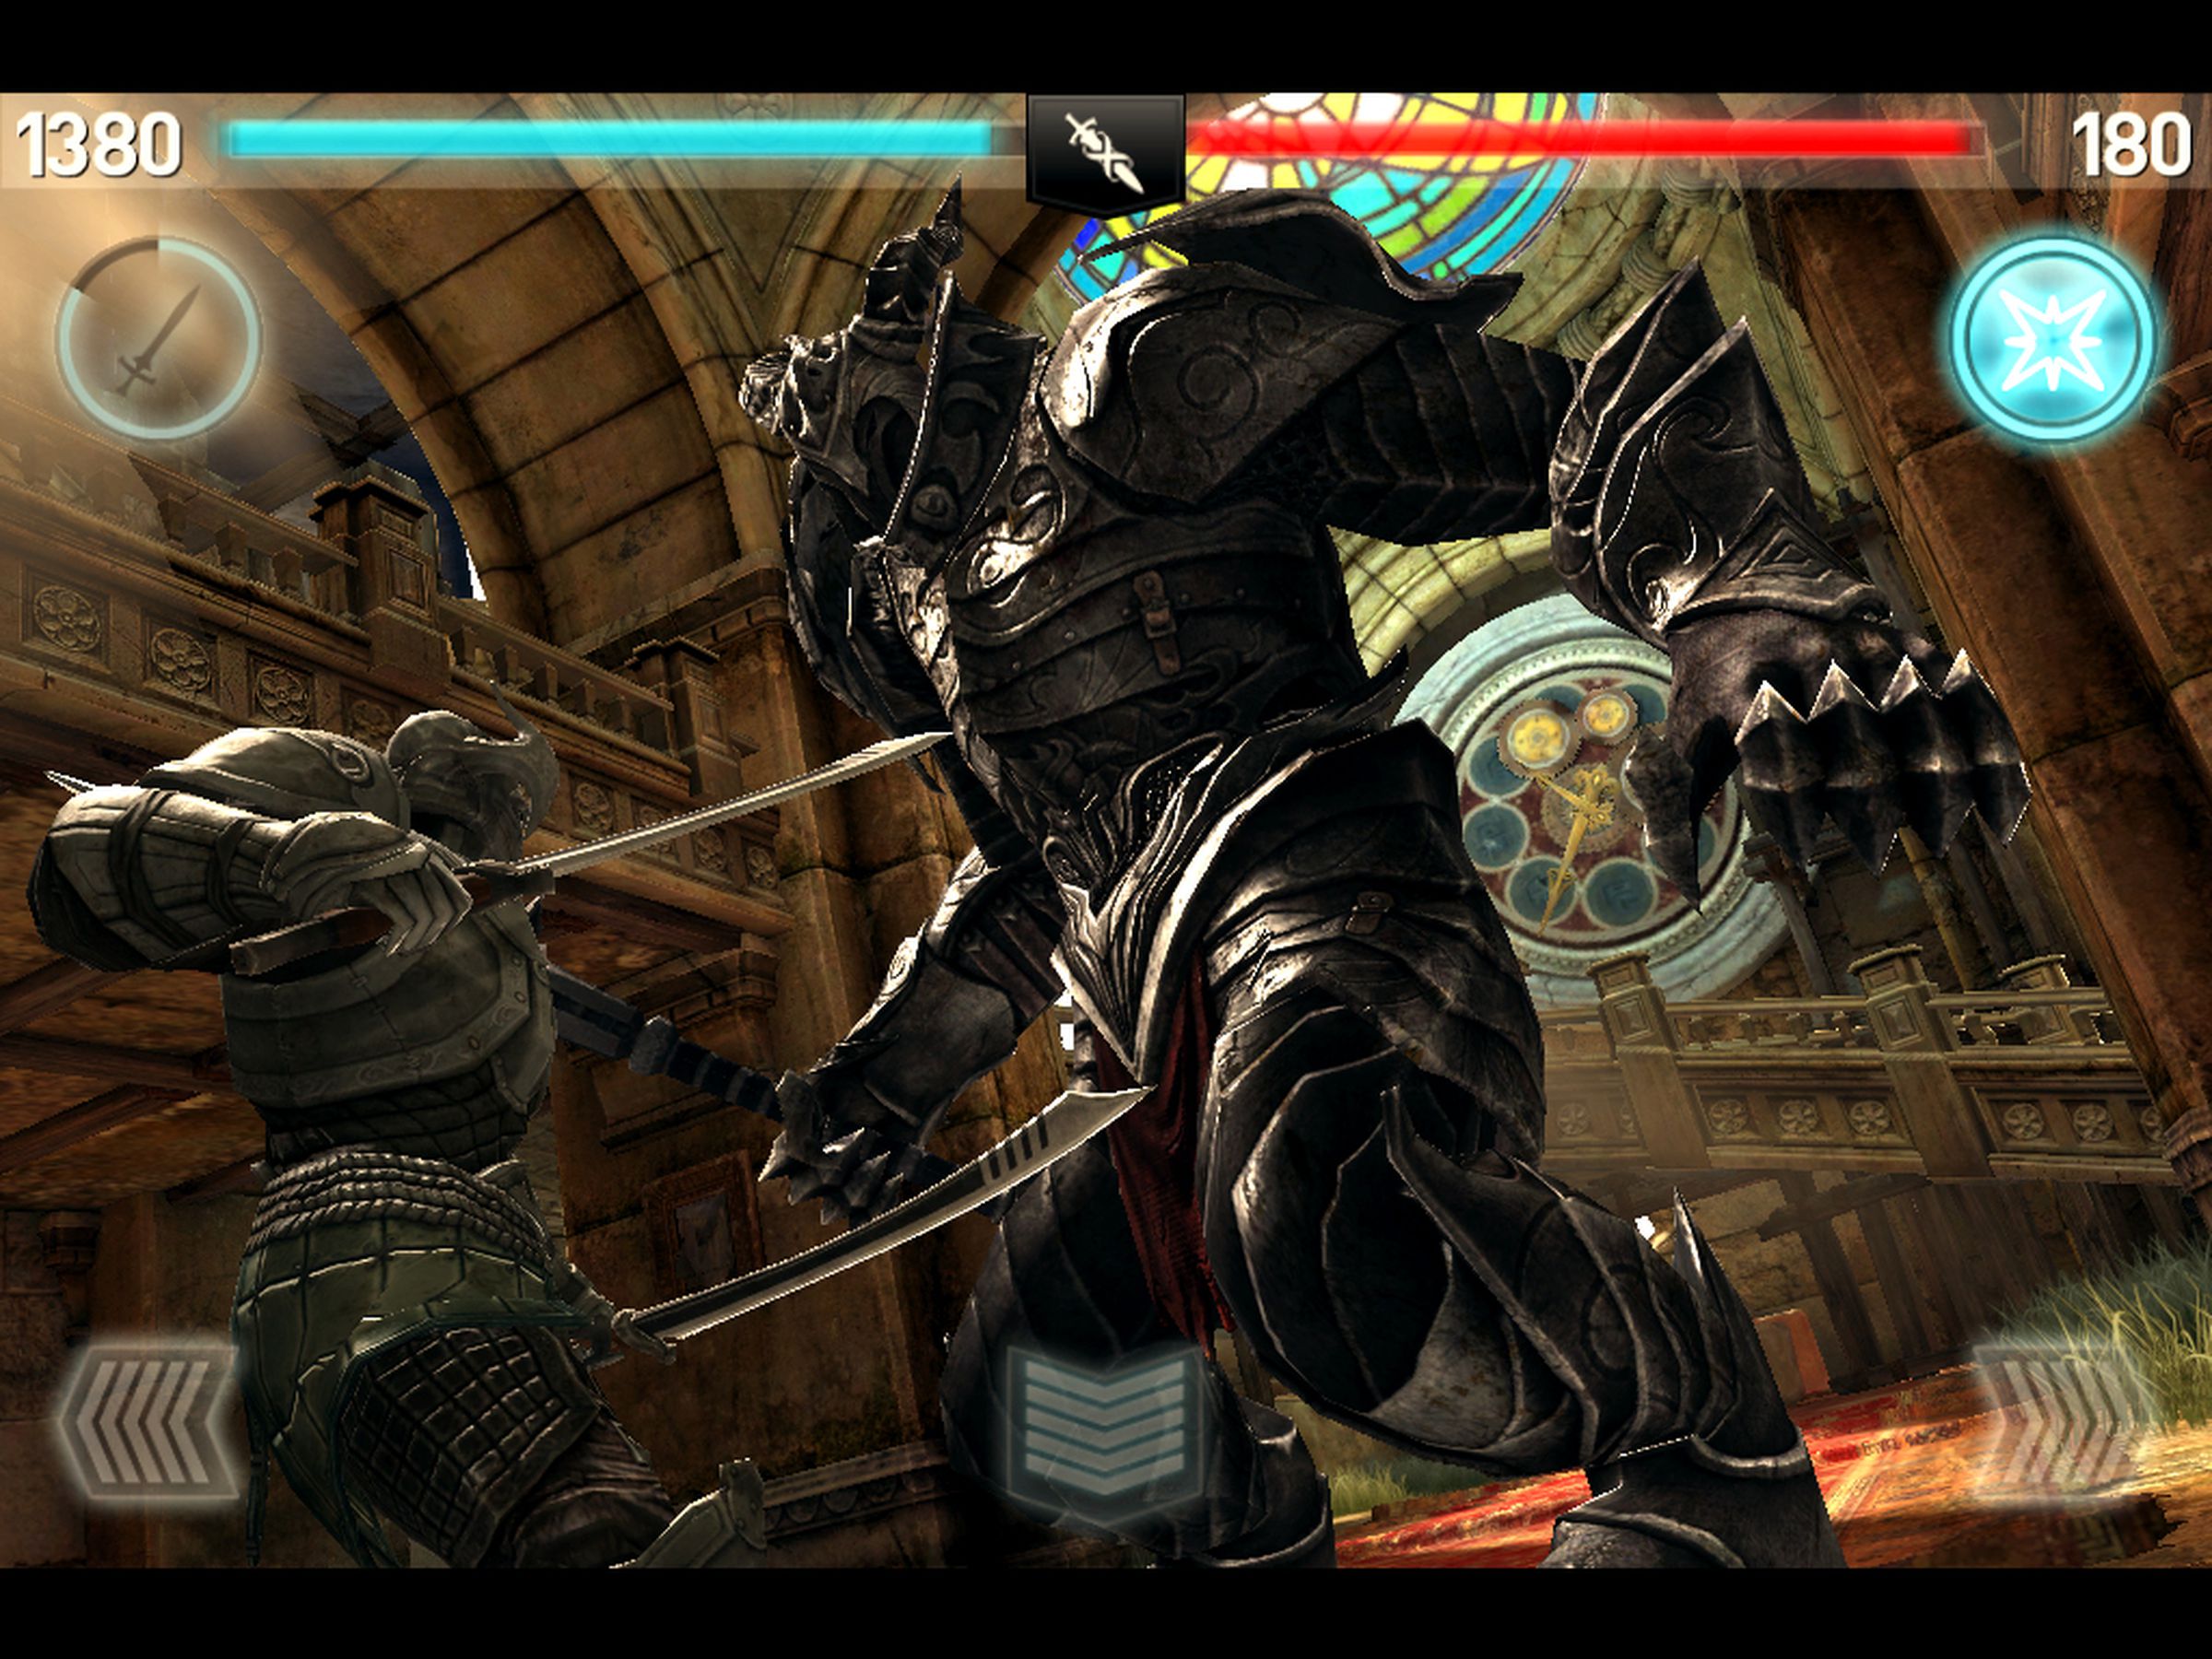 Infinity Blade 2 Pictures and Screenshots